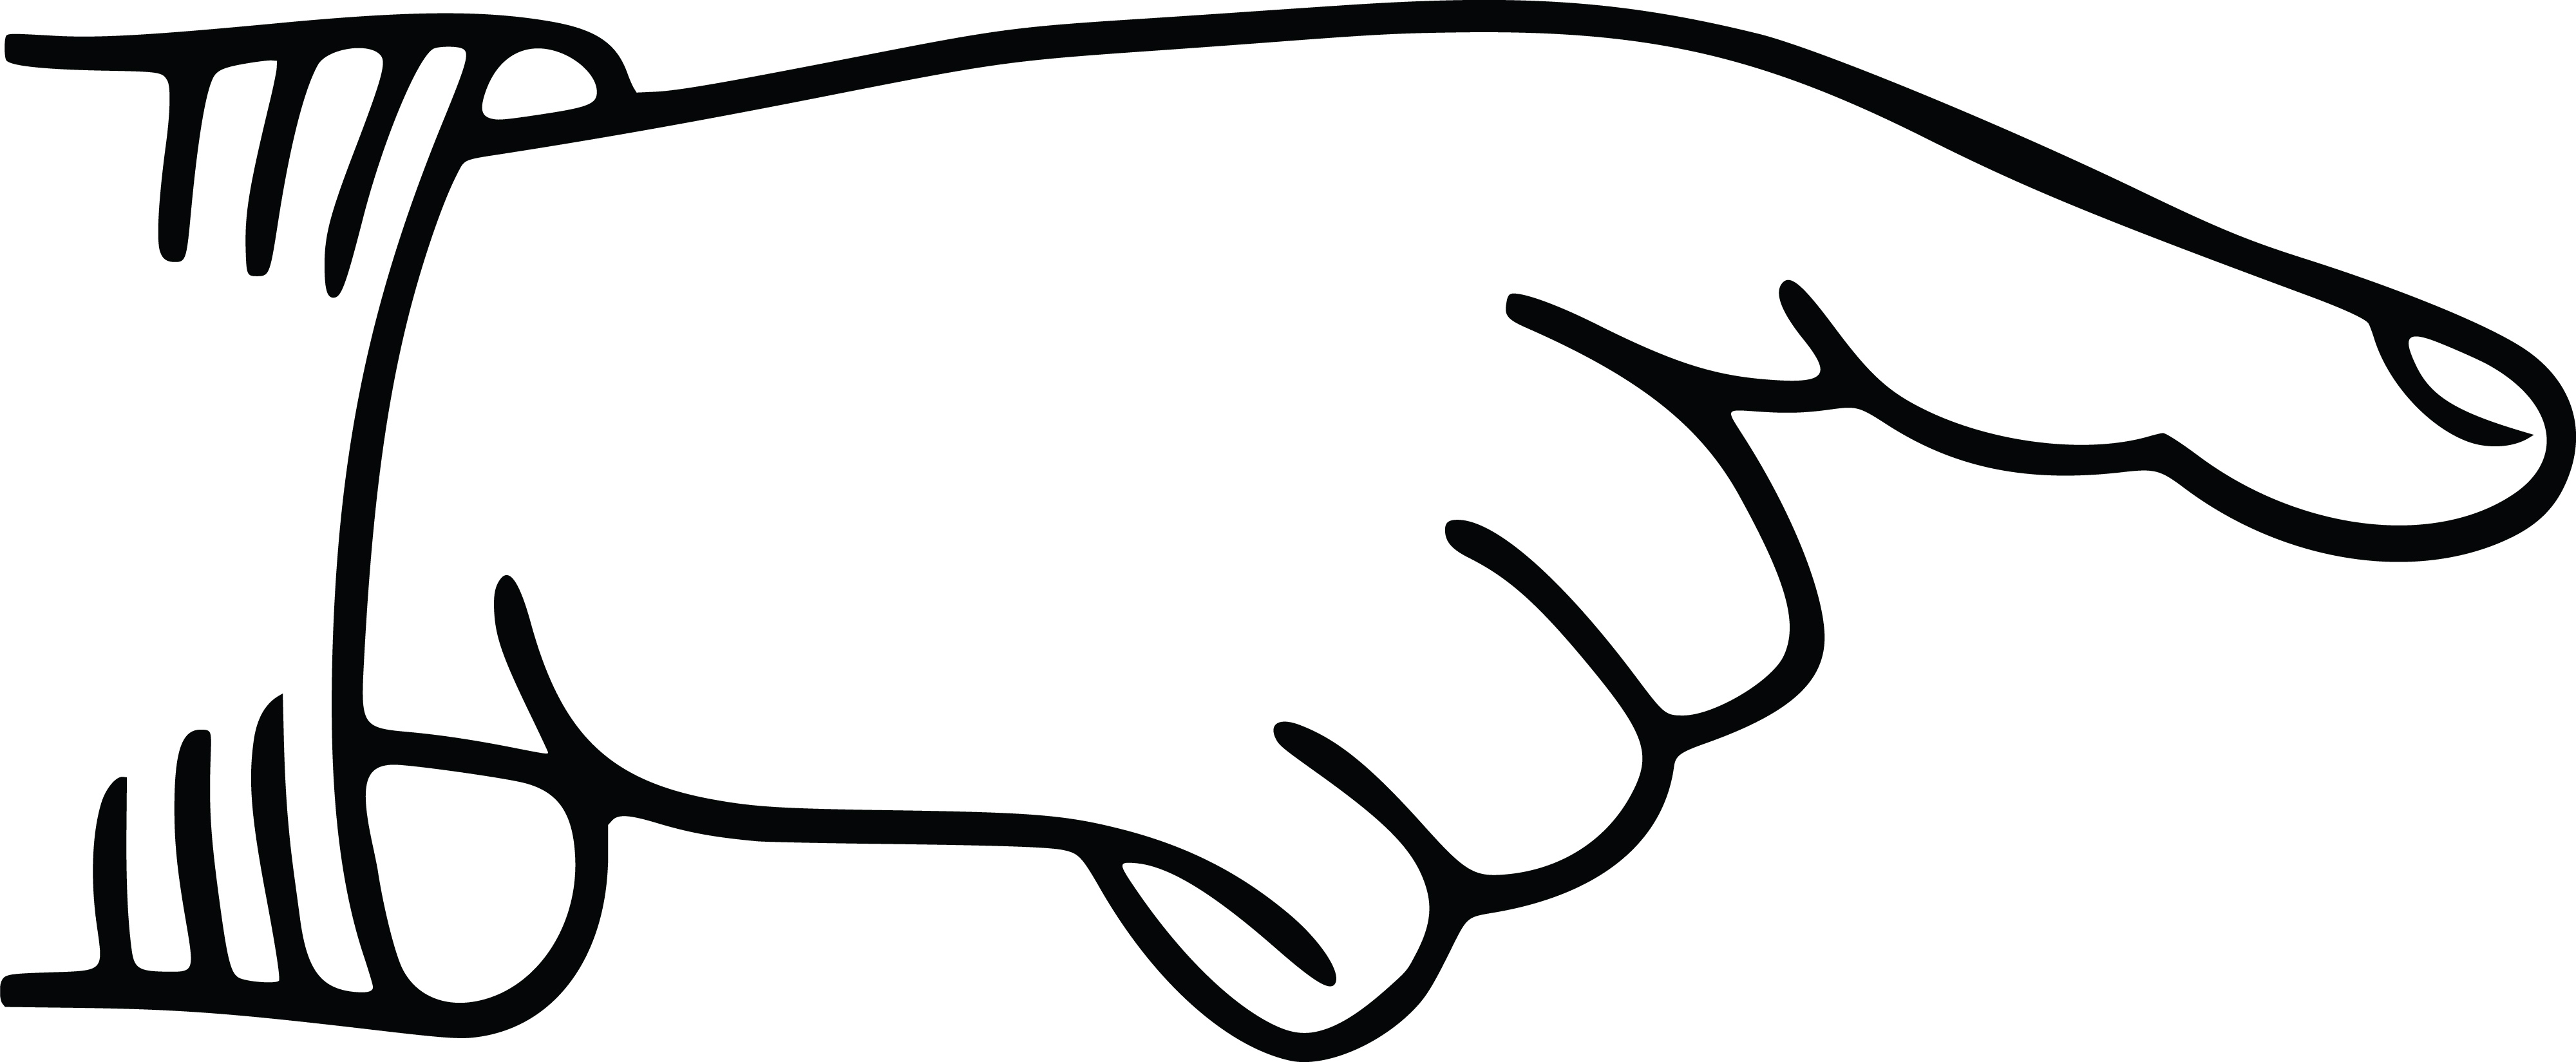 Clipart Of A Hand Pointing a Finger, Black White.